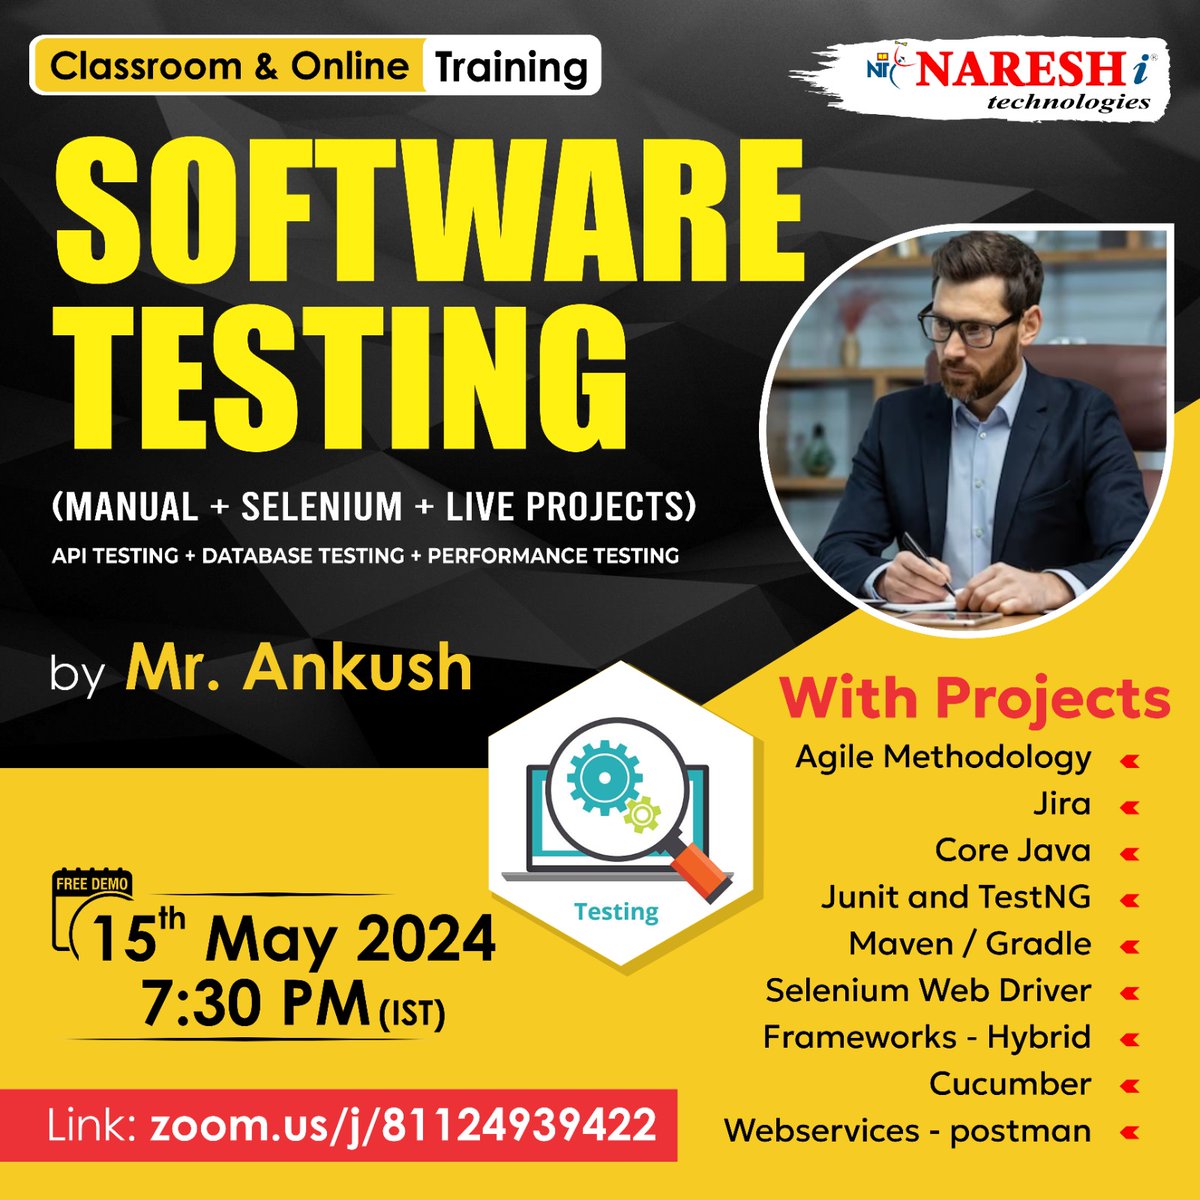 ✍️Enroll Now: bit.ly/3QETQpb
👉Attend a Free Demo On Selenium By Mr. Ankush .
📅Demo On : 15th May @ 7:30 PM (IST).

#selenium #manual #automation #softwaretesting #jira #corajava #webservices #frameworks #seleniumwebdriver #course #cucumber #testing #software #learning